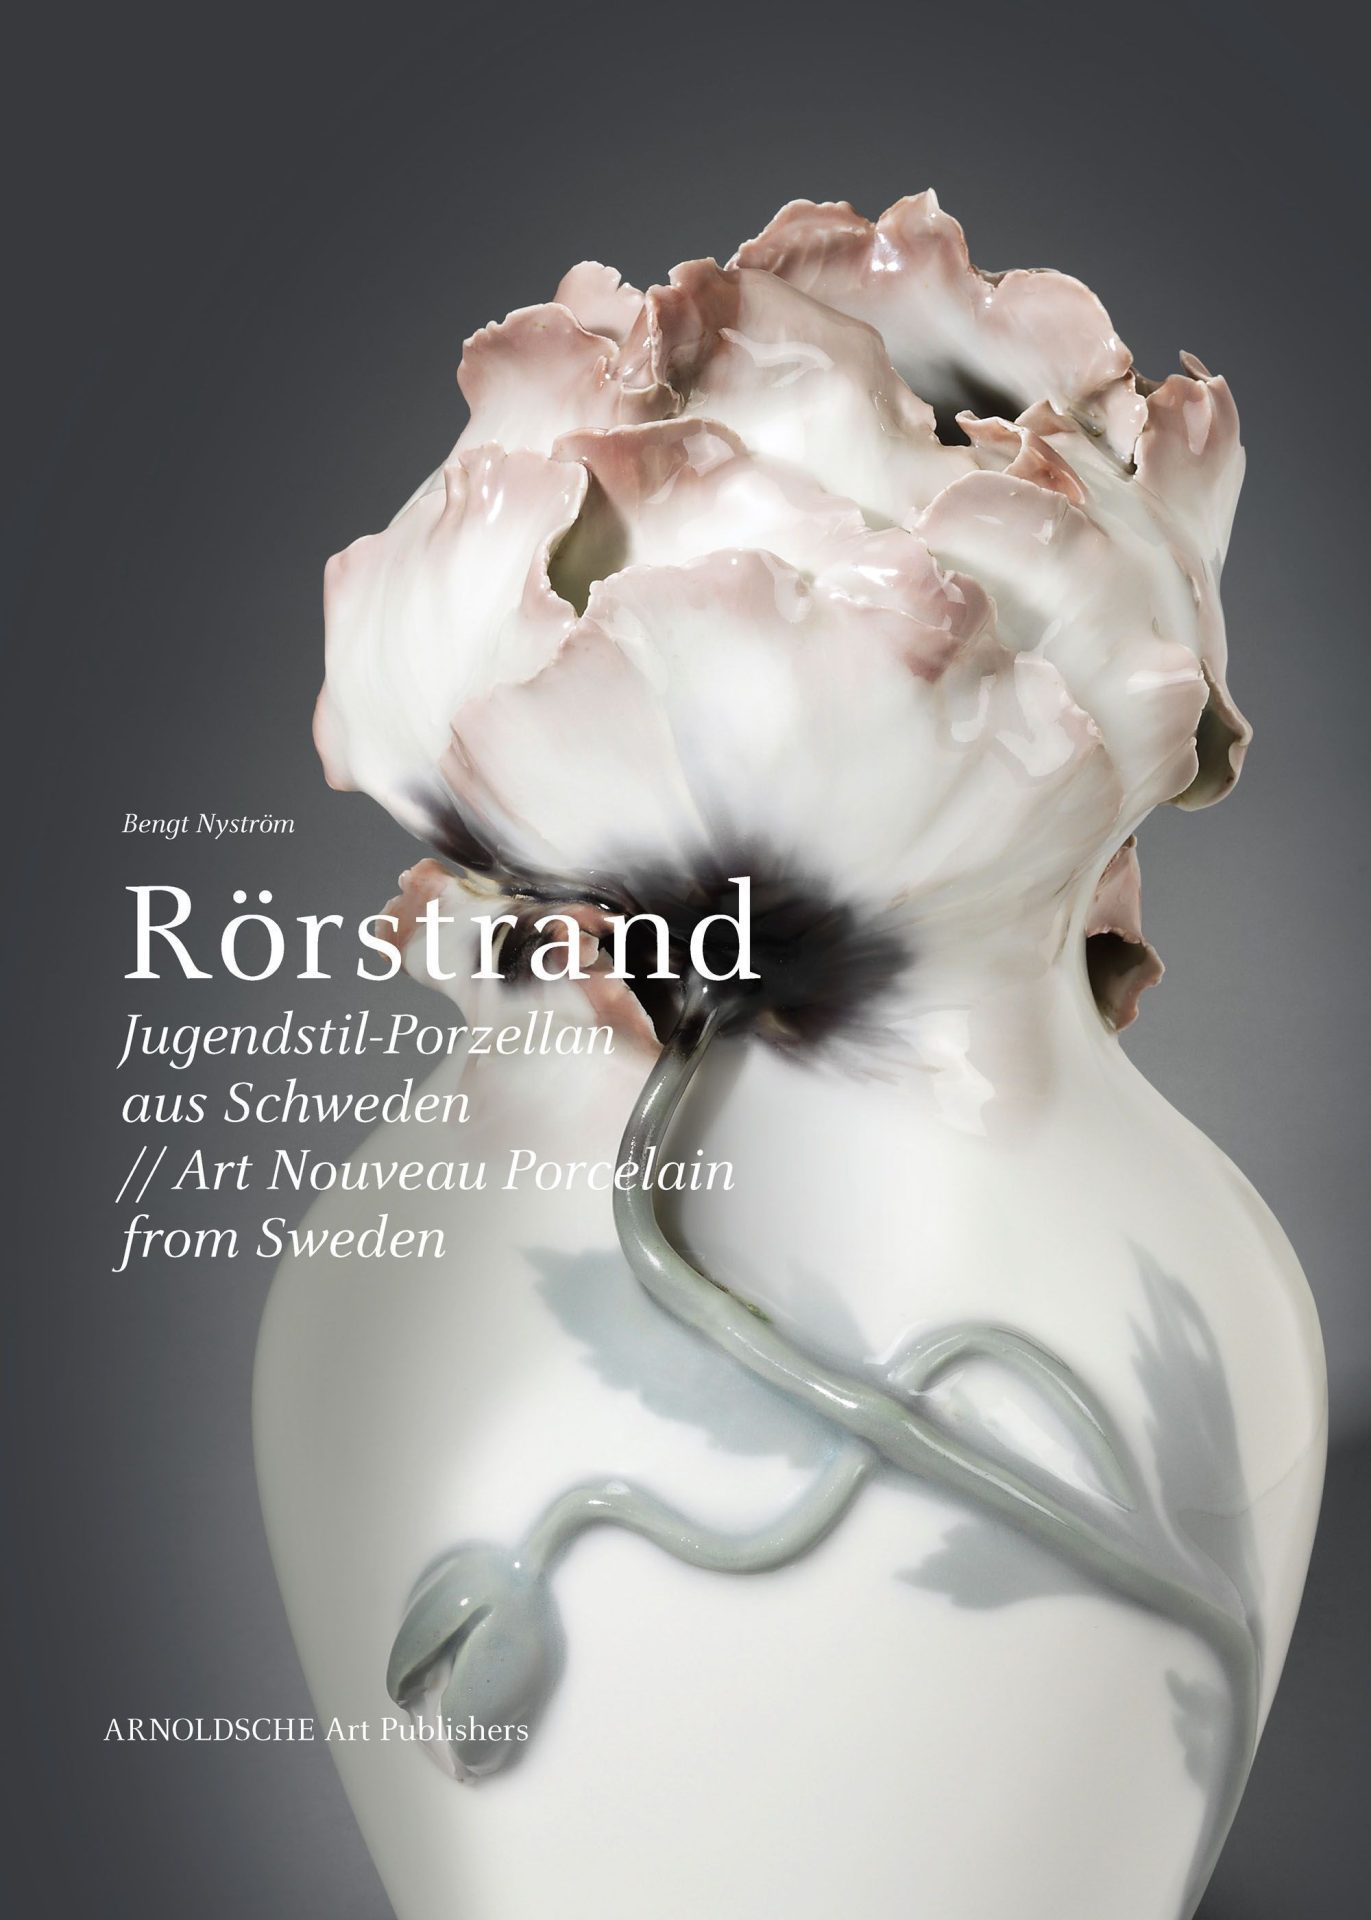 White vase, the lower end of which is cut off. A flower is placed on top, wrapped around the body with grey leaves and stem. The upper end is formed by overlapping petals with pink ends. Labelled in white: Rörstrand Art Noveau Porcelain from Sweden.